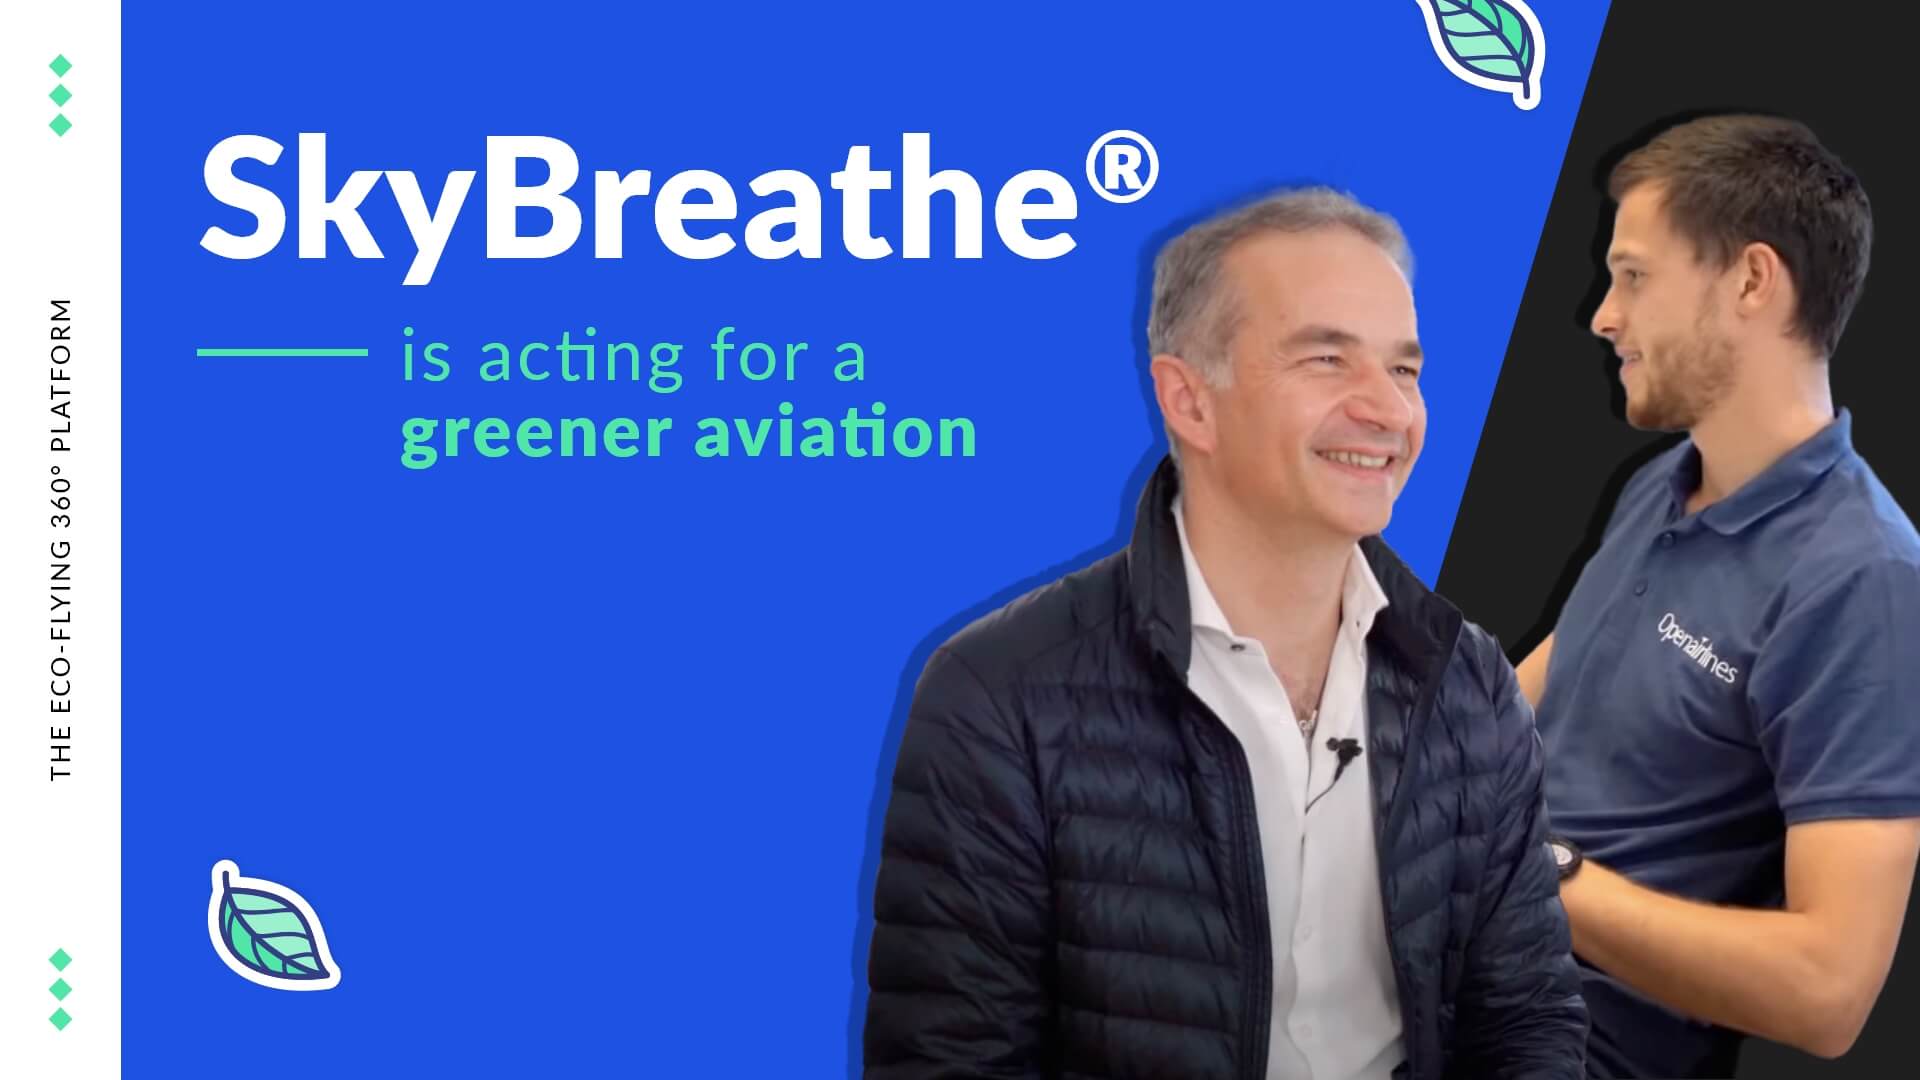 SkyBreathe® is acting for a greener aviation